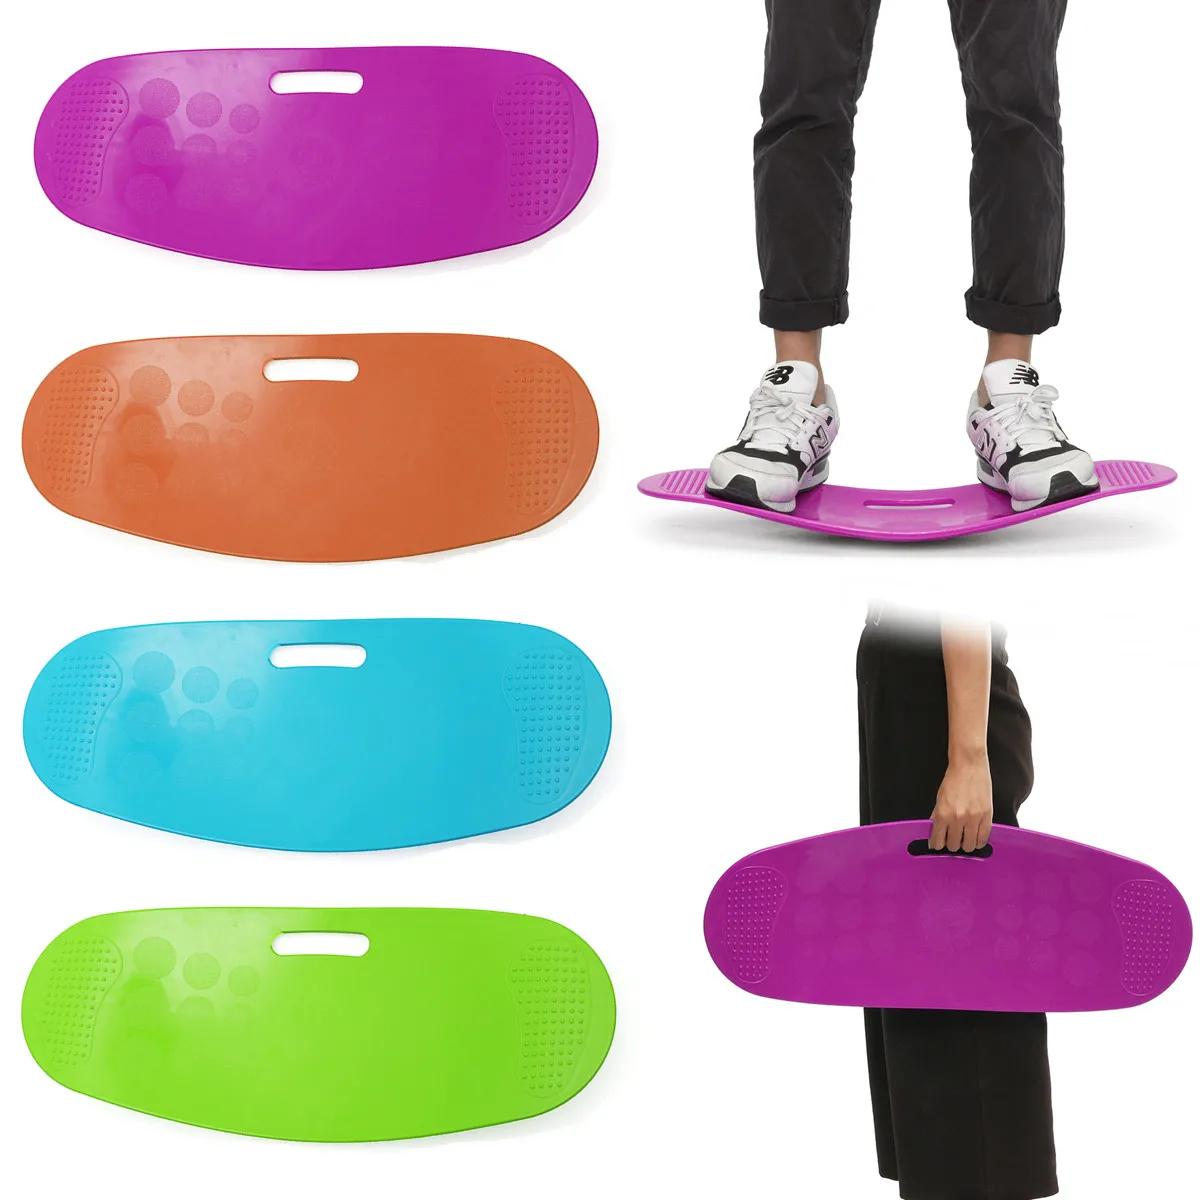 

Yoga Exercise Balance Fitness Twisting Balance Board ABS Equipment Training Abdominal Muscles Legs Home Gyms Yoga Board